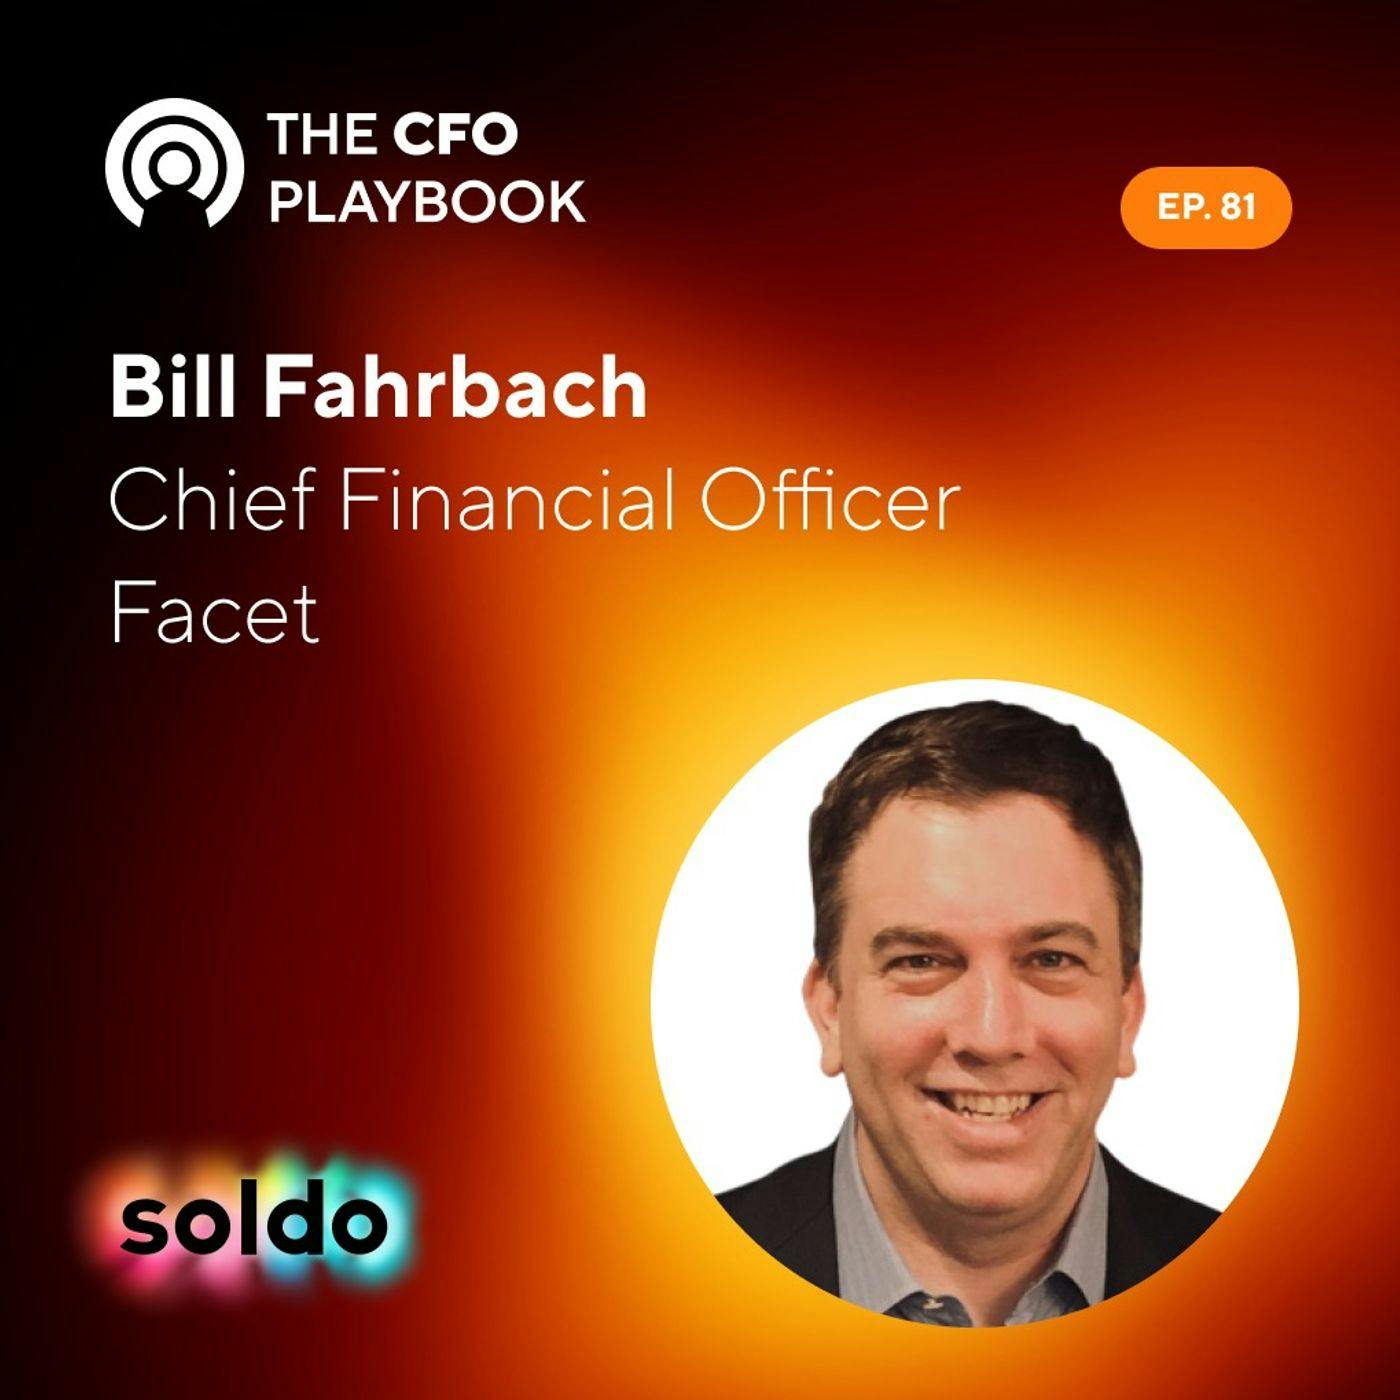 How a Remote-first Culture Has Affected Finance with Bill Fahrbach, CFO at Facet